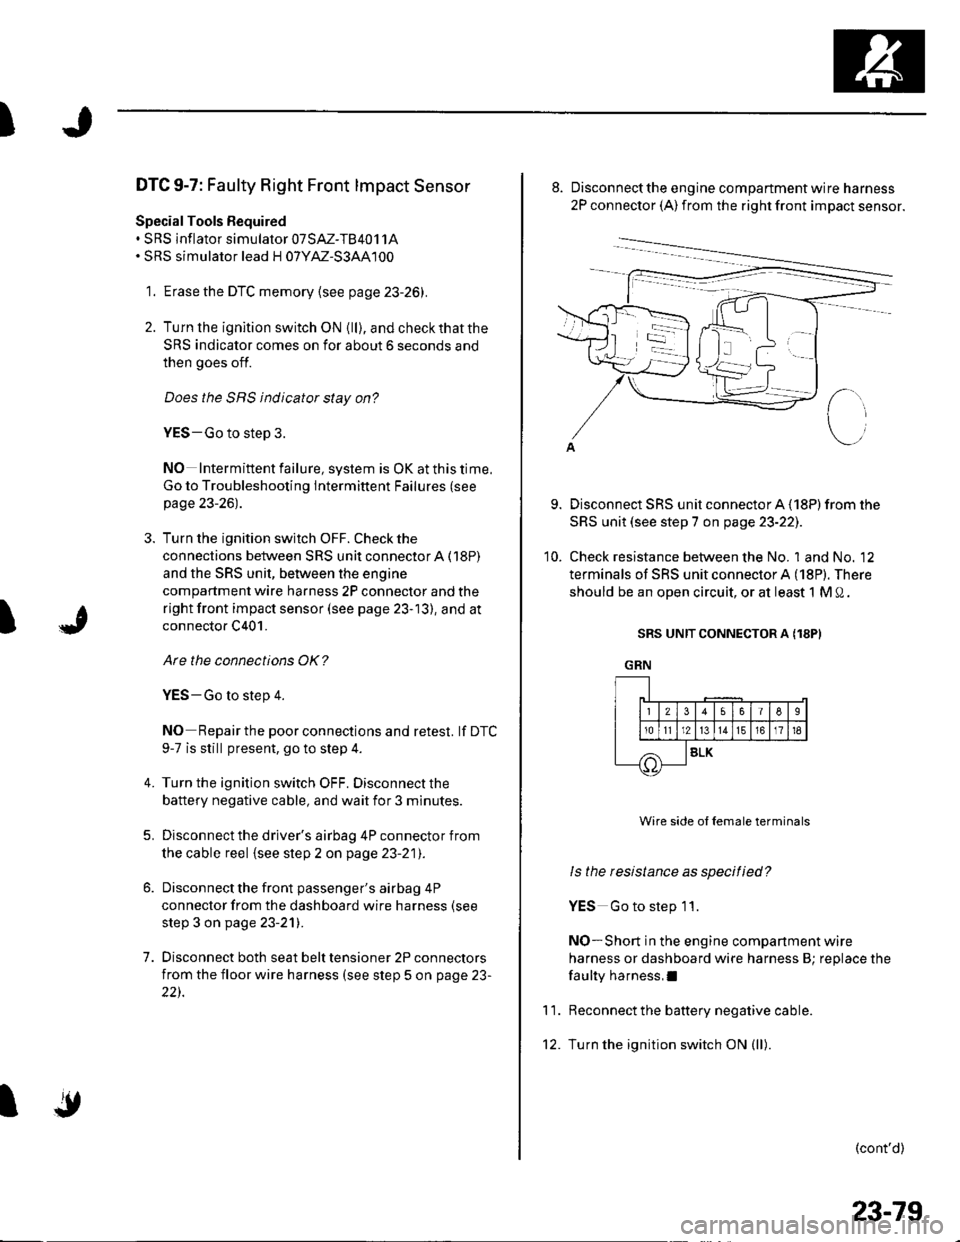 HONDA CIVIC 2003 7.G Service Manual )
t
DTC 9-7: Faulty Right Front lmpact Sensor
Special Tools Bequired. SRS inflator simulator 07SAZ-TB4011A. SRS simulator lead H 07YM-S3AA100
1. Erase the DTC memory {see page 23-26).
2. Turn lhe igni